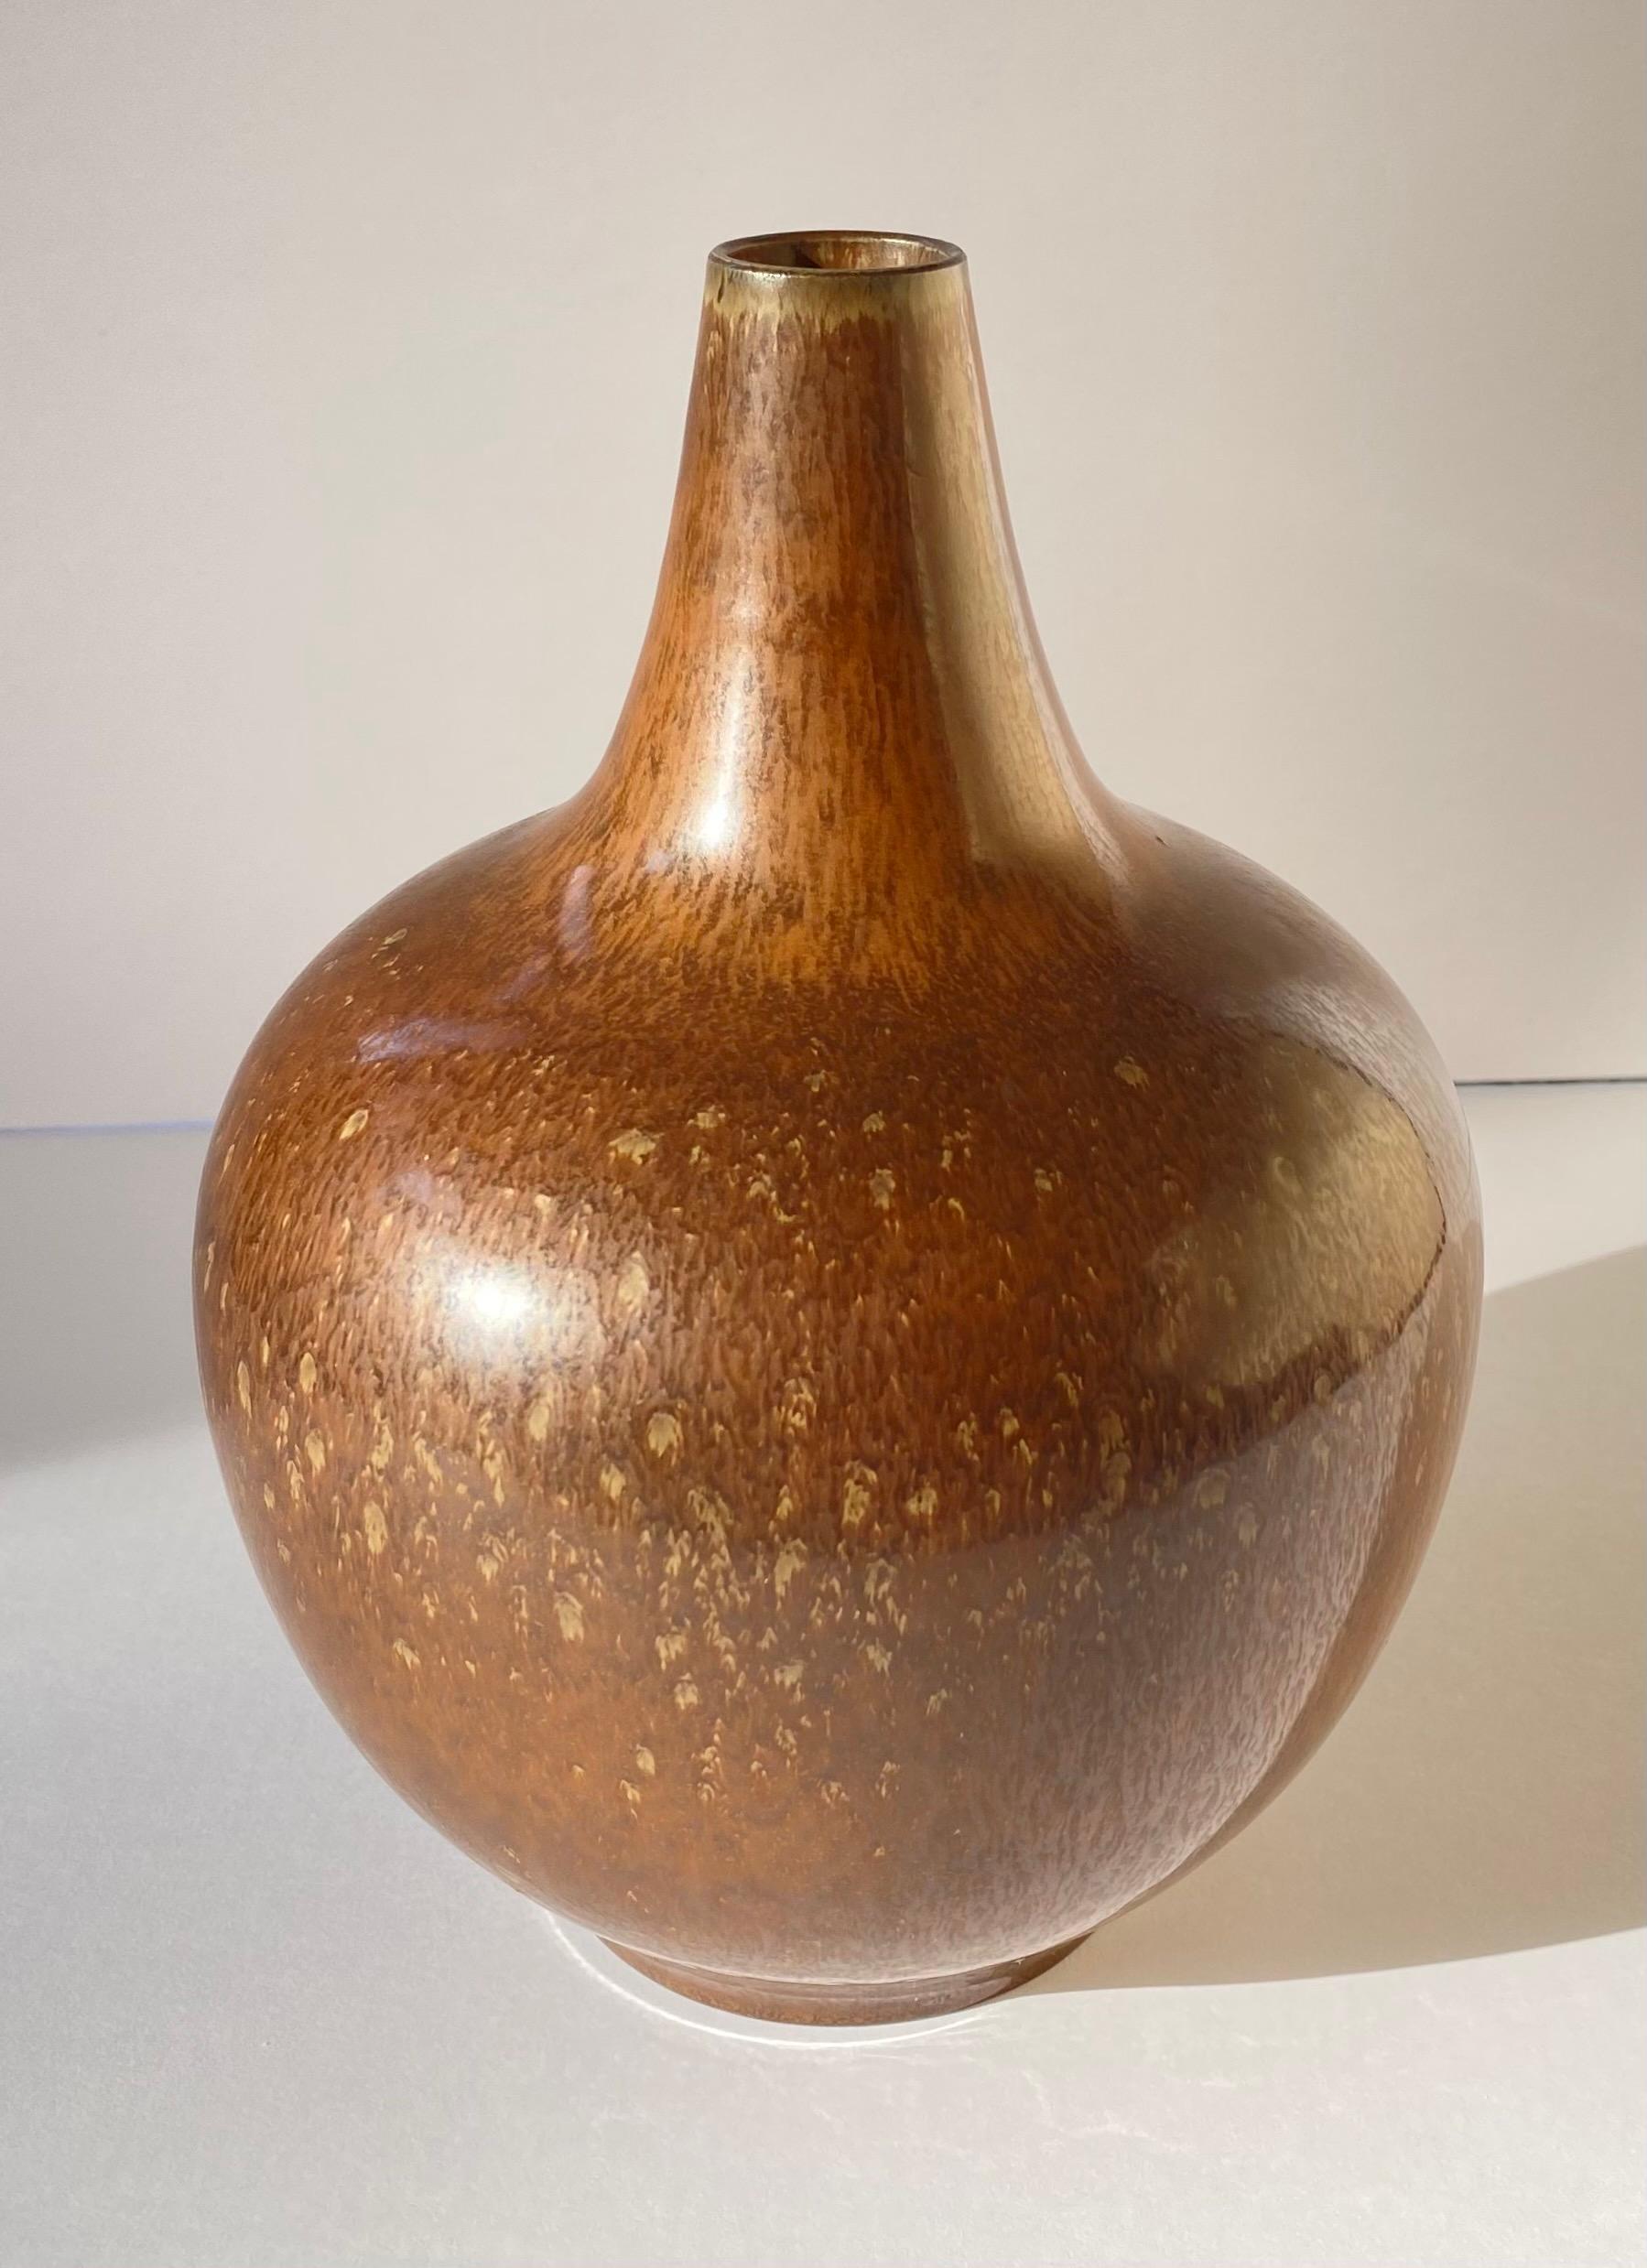 Scandinavian modern hand crafted and amber brown glazed ceramic vase
 by Gunnar Nylund for Rorstrand , Sweden, c. 1950's.
Signed on bottom, R with 3 crowns, Sweden, and GN.